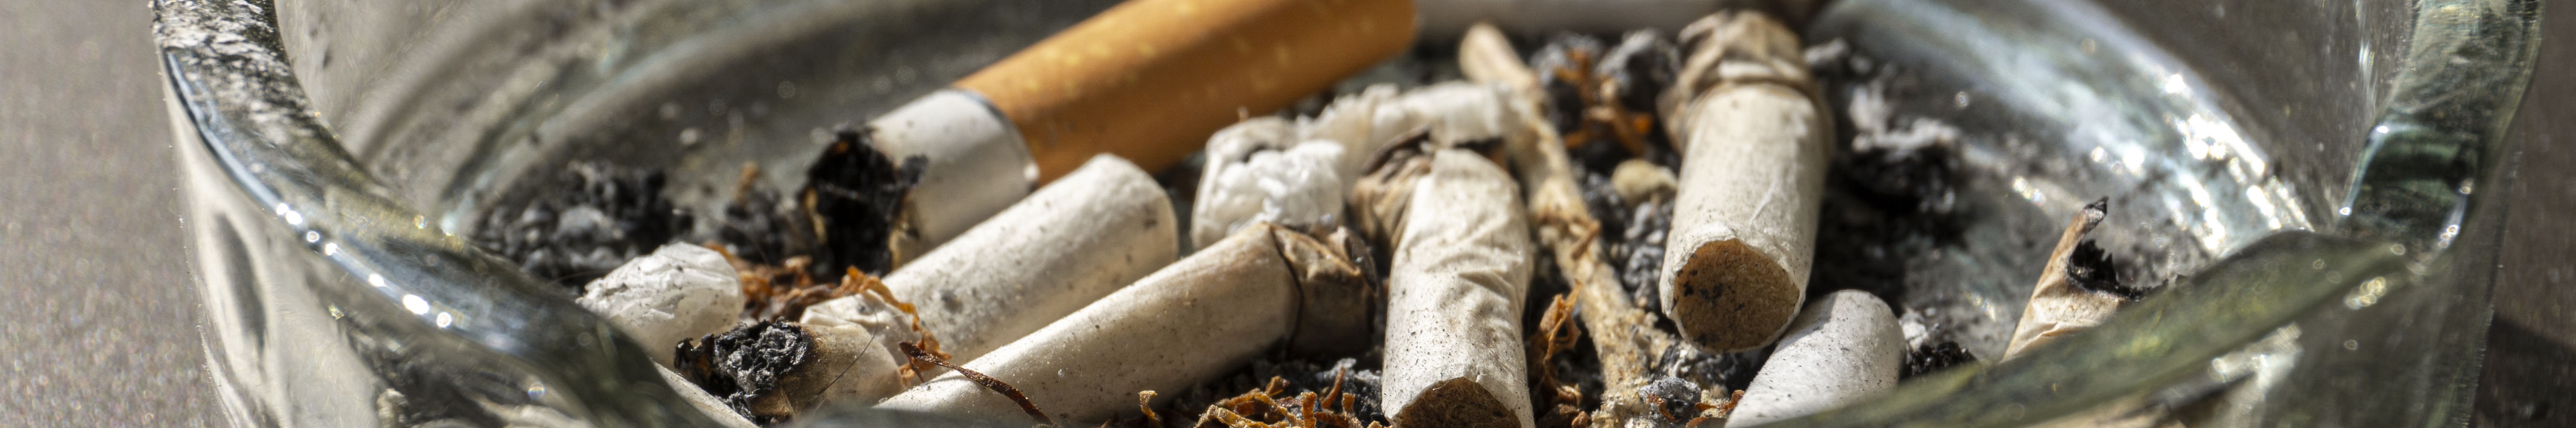 Japan Tobacco's cigarette products contribute to the global disease burden